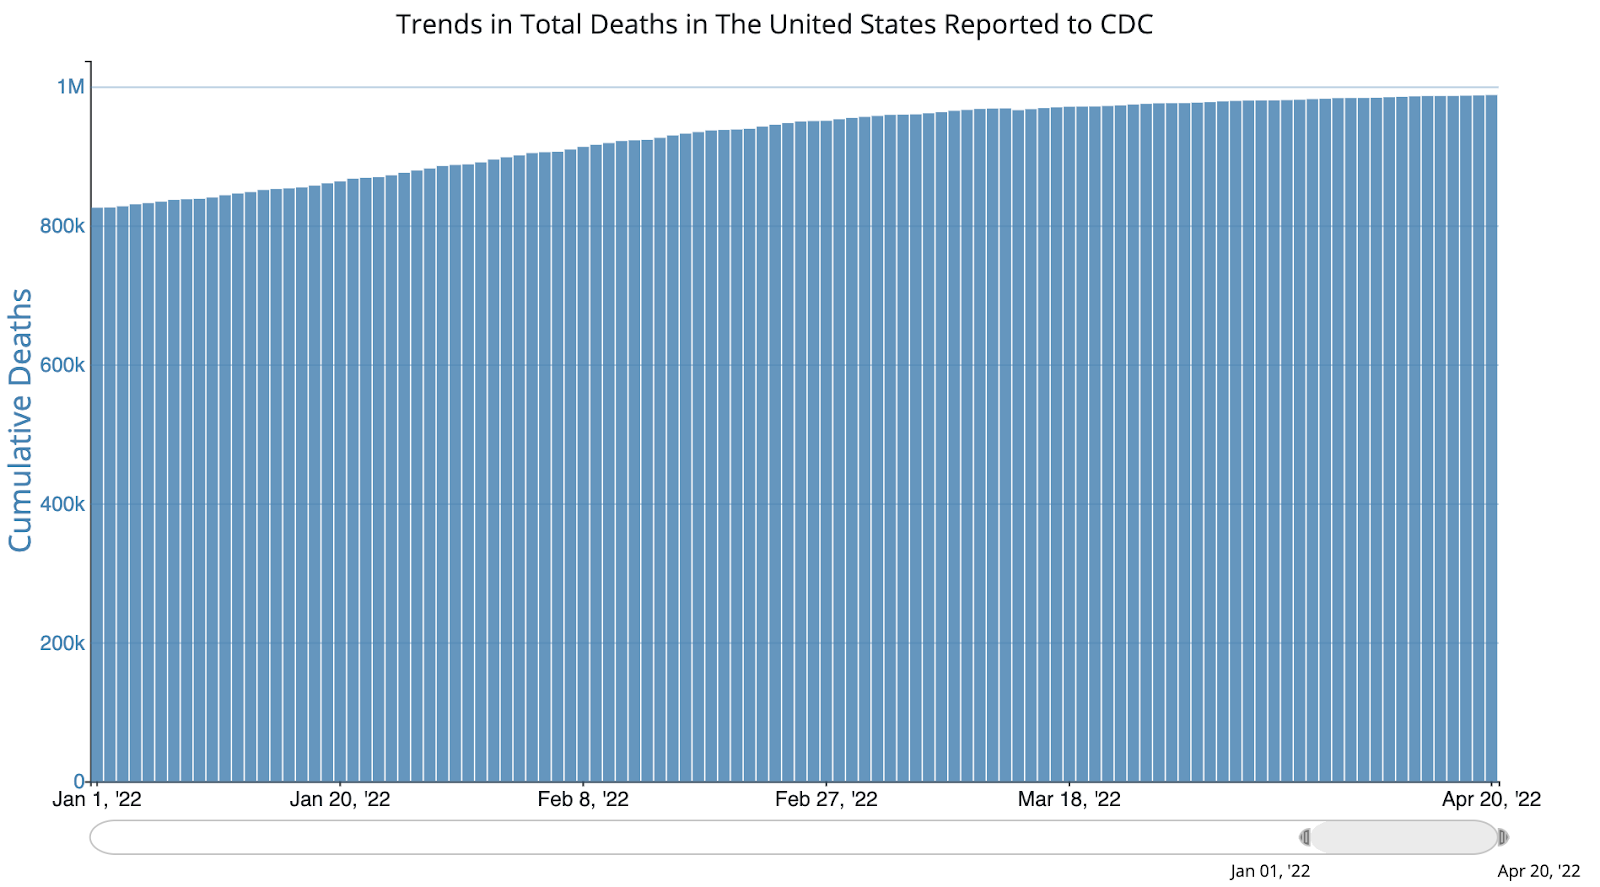 A bar graph showing the cumulative deaths since January 2022 increasing steadily from just above 800K to just below 1M.